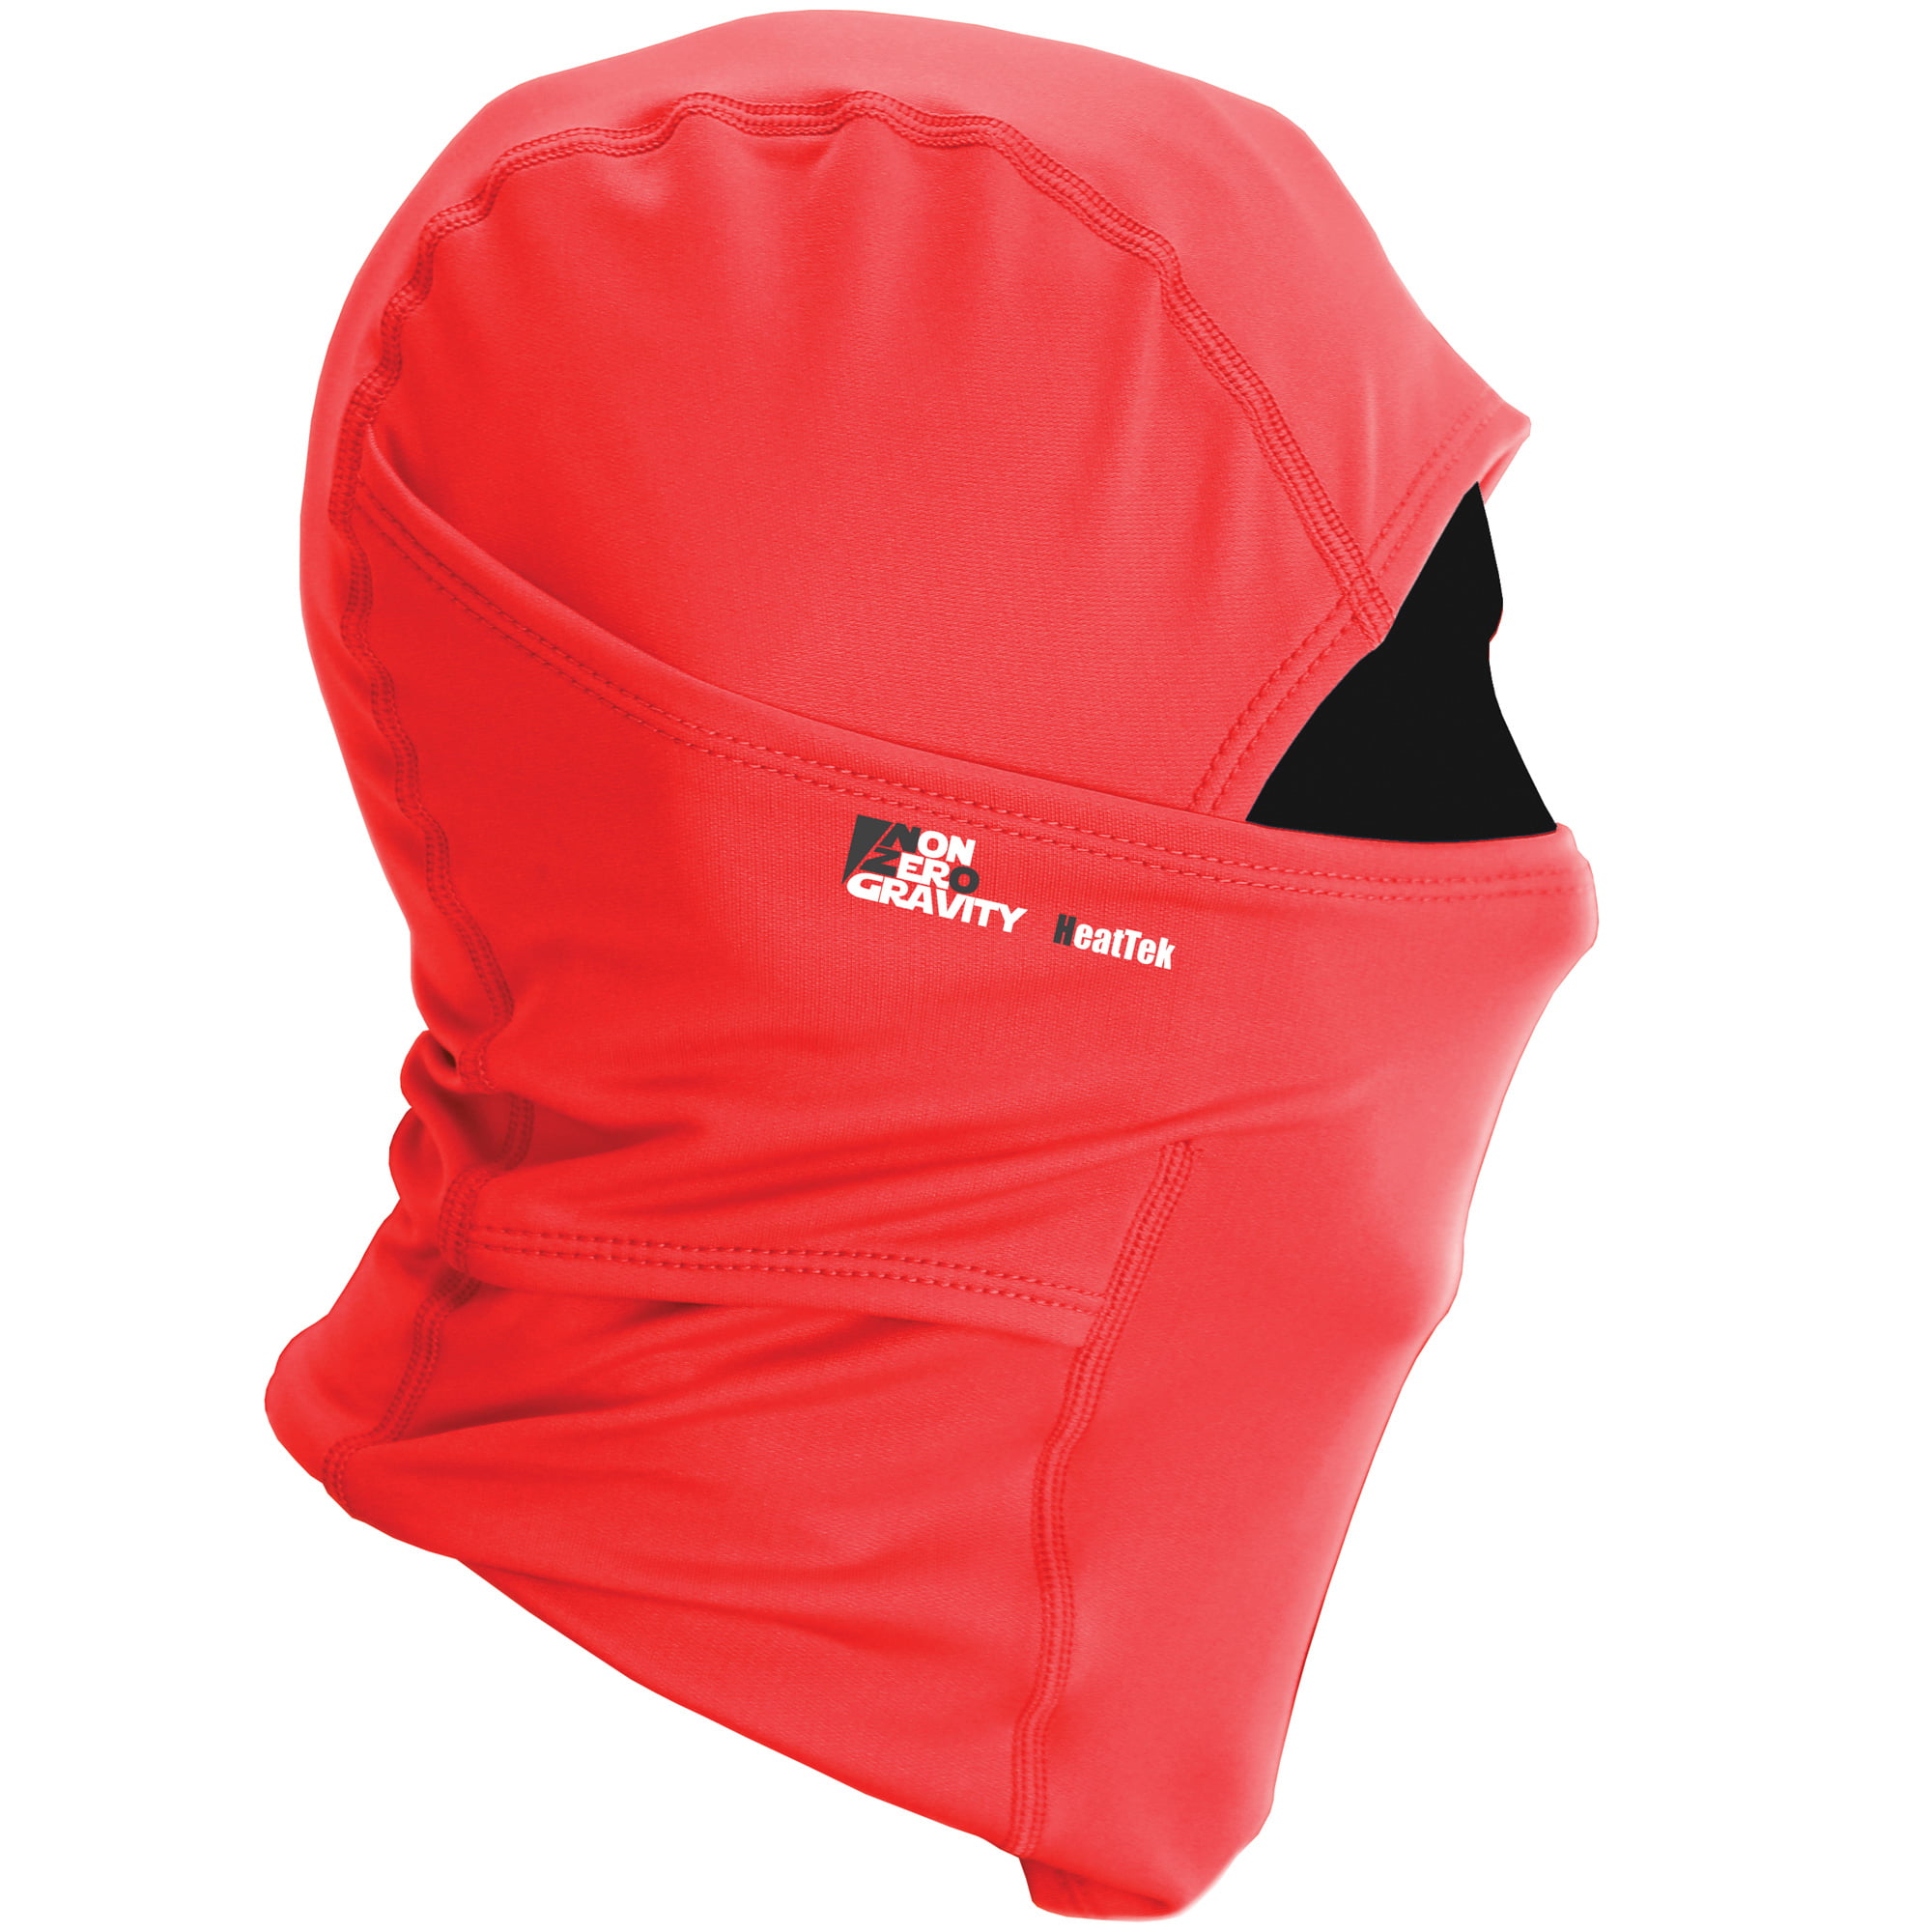 BALACLAVA CASTELLI ARRIVAL 2 THERMO SKULLY color ORANGE-RED one size